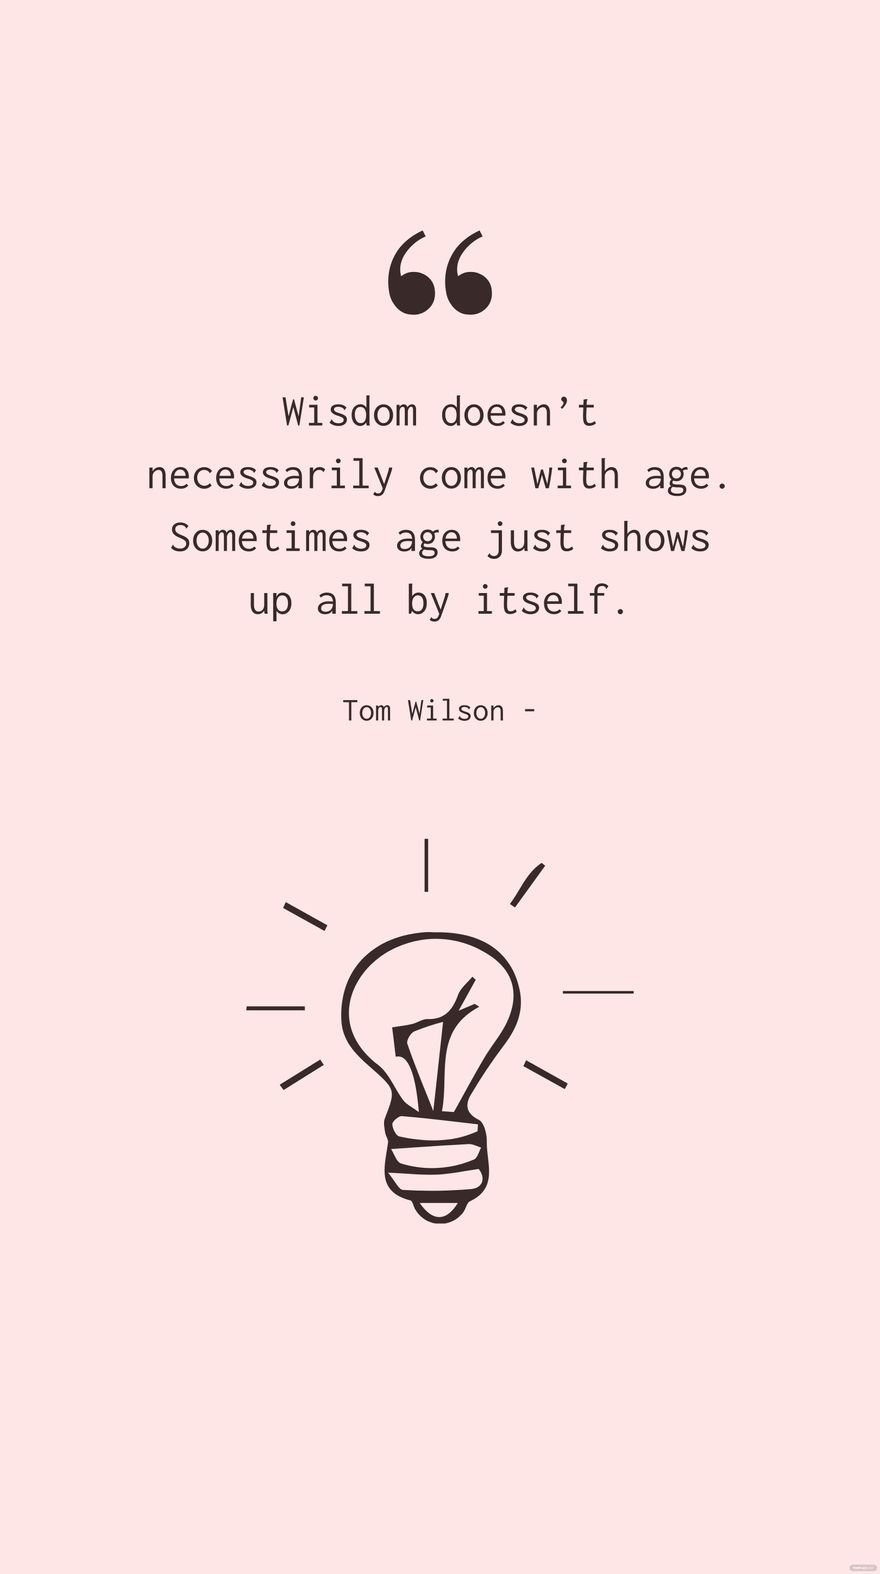 Tom Wilson - Wisdom doesn’t necessarily come with age. Sometimes age just shows up all by itself.